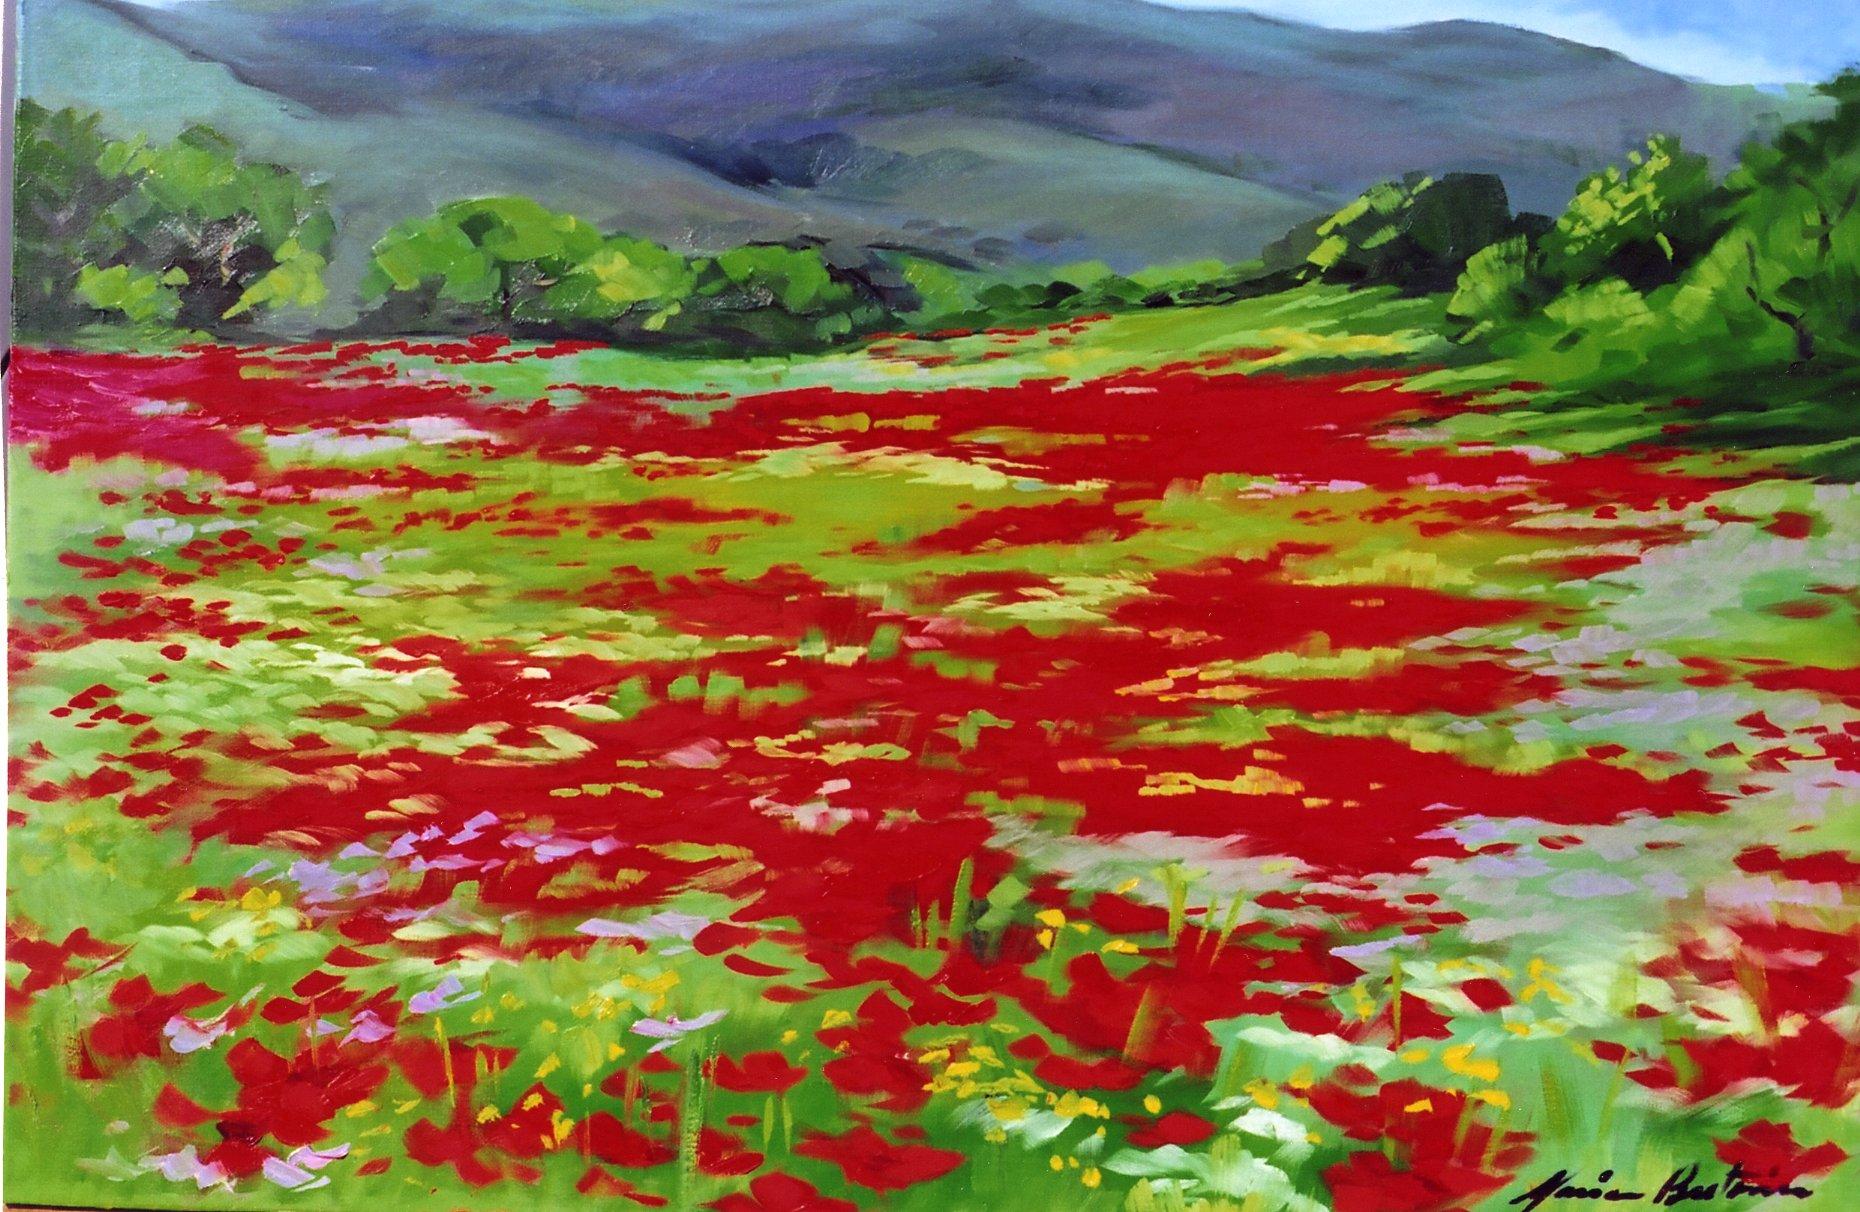 Maria Bertrán Landscape Painting - "Elizabeth's Poppy Field"  Impressionist Painting by Maria Bertran In Provence